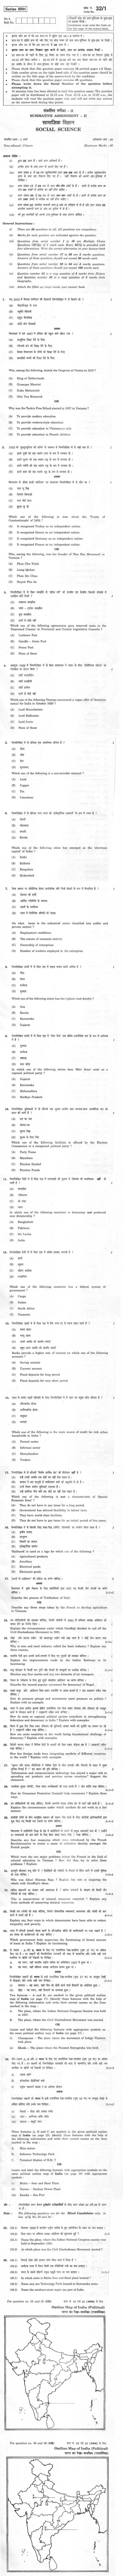 CBSE Class X Previous Year Question Papers 2012 Social Science